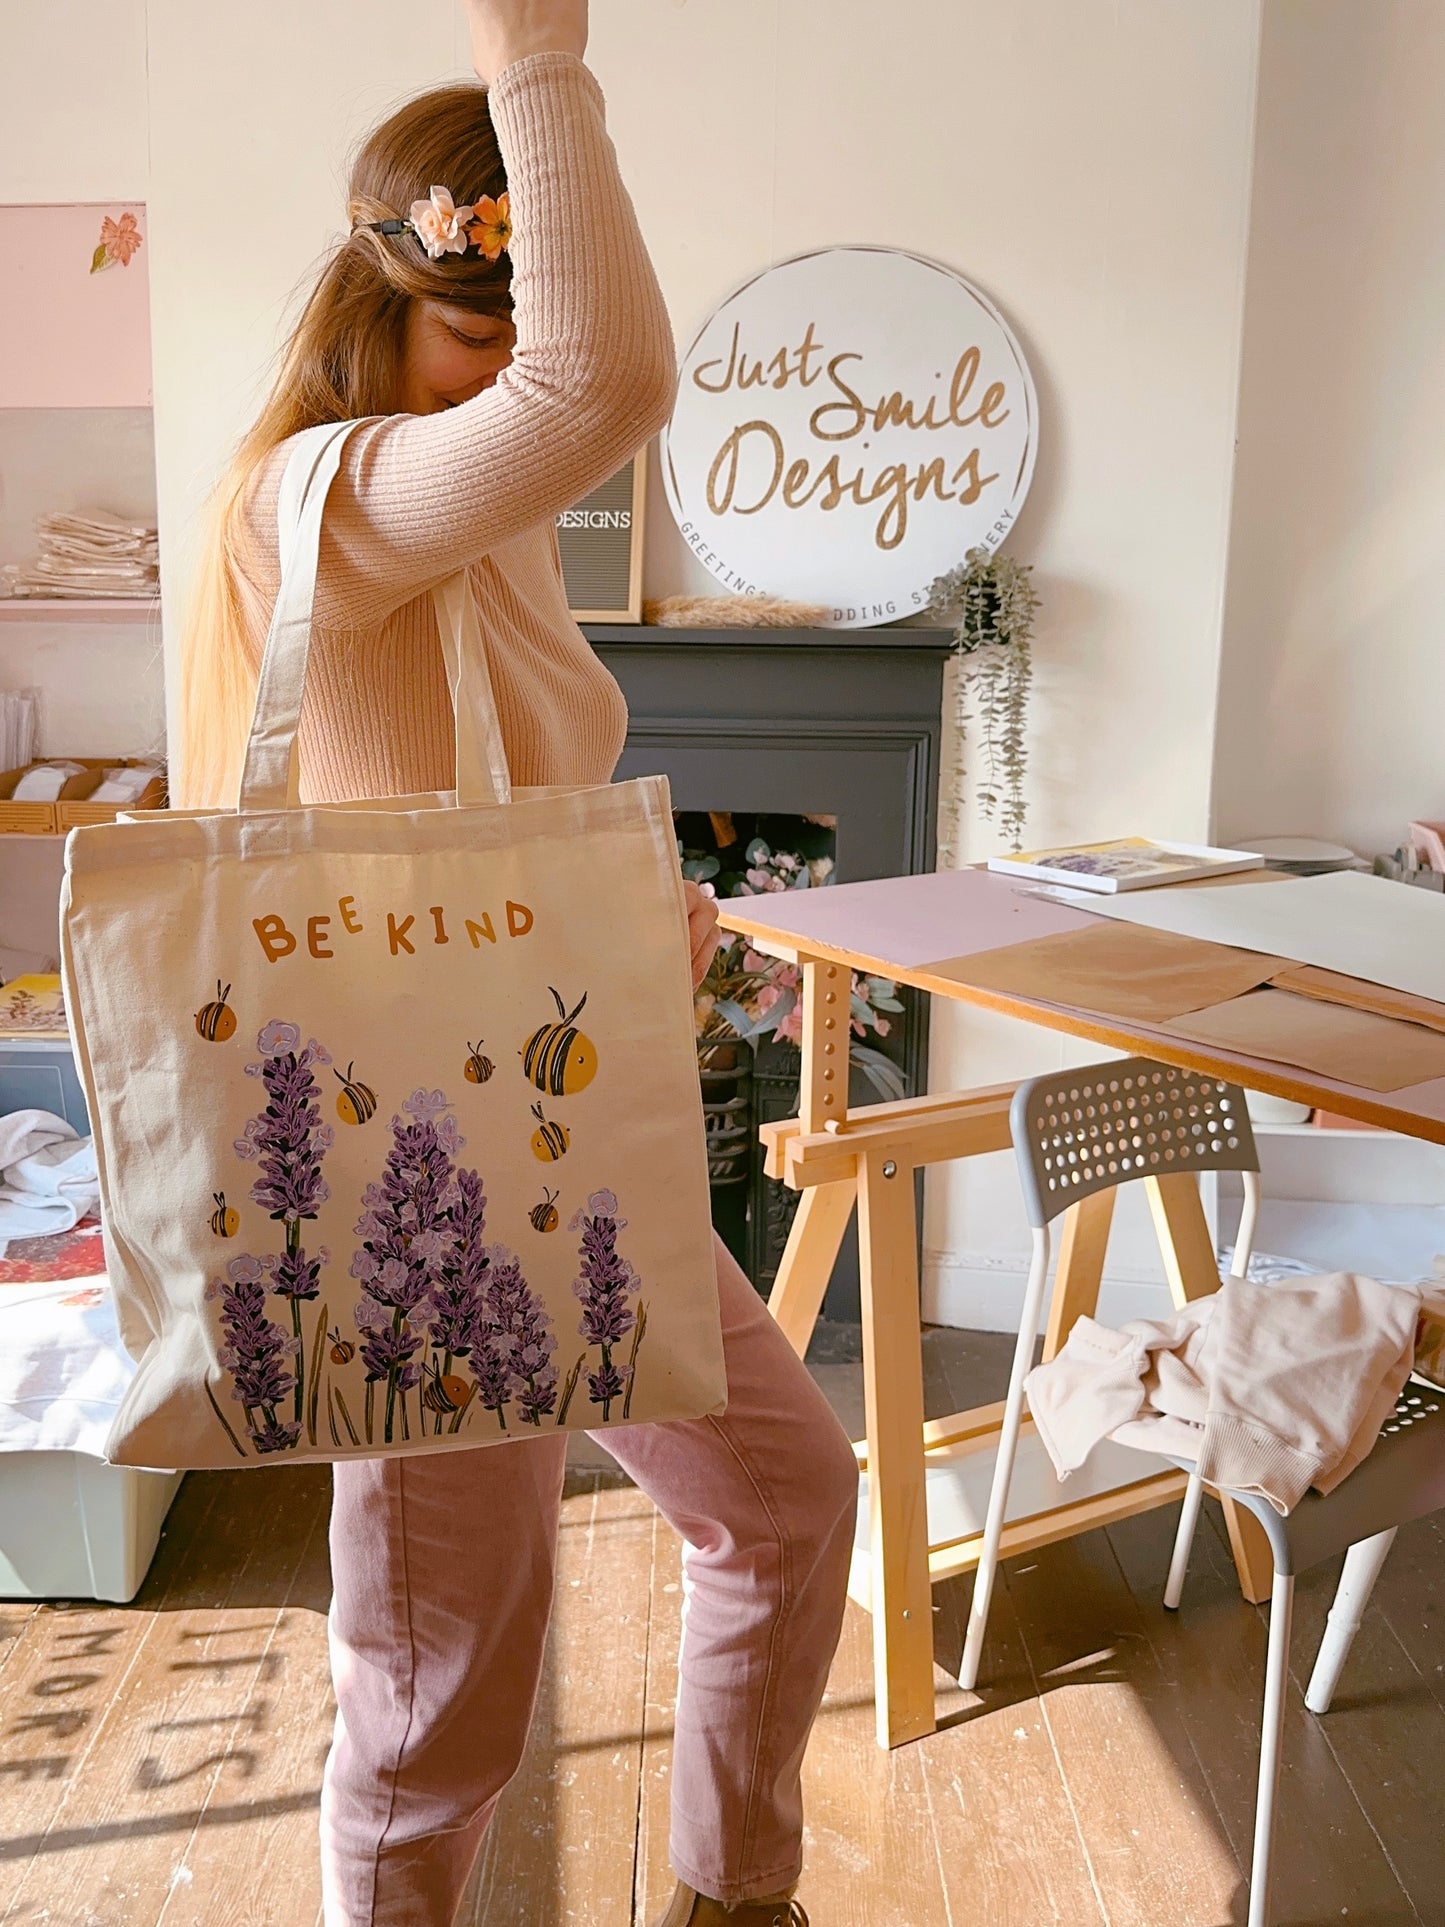 Bee Lavender Giant Tote Bag